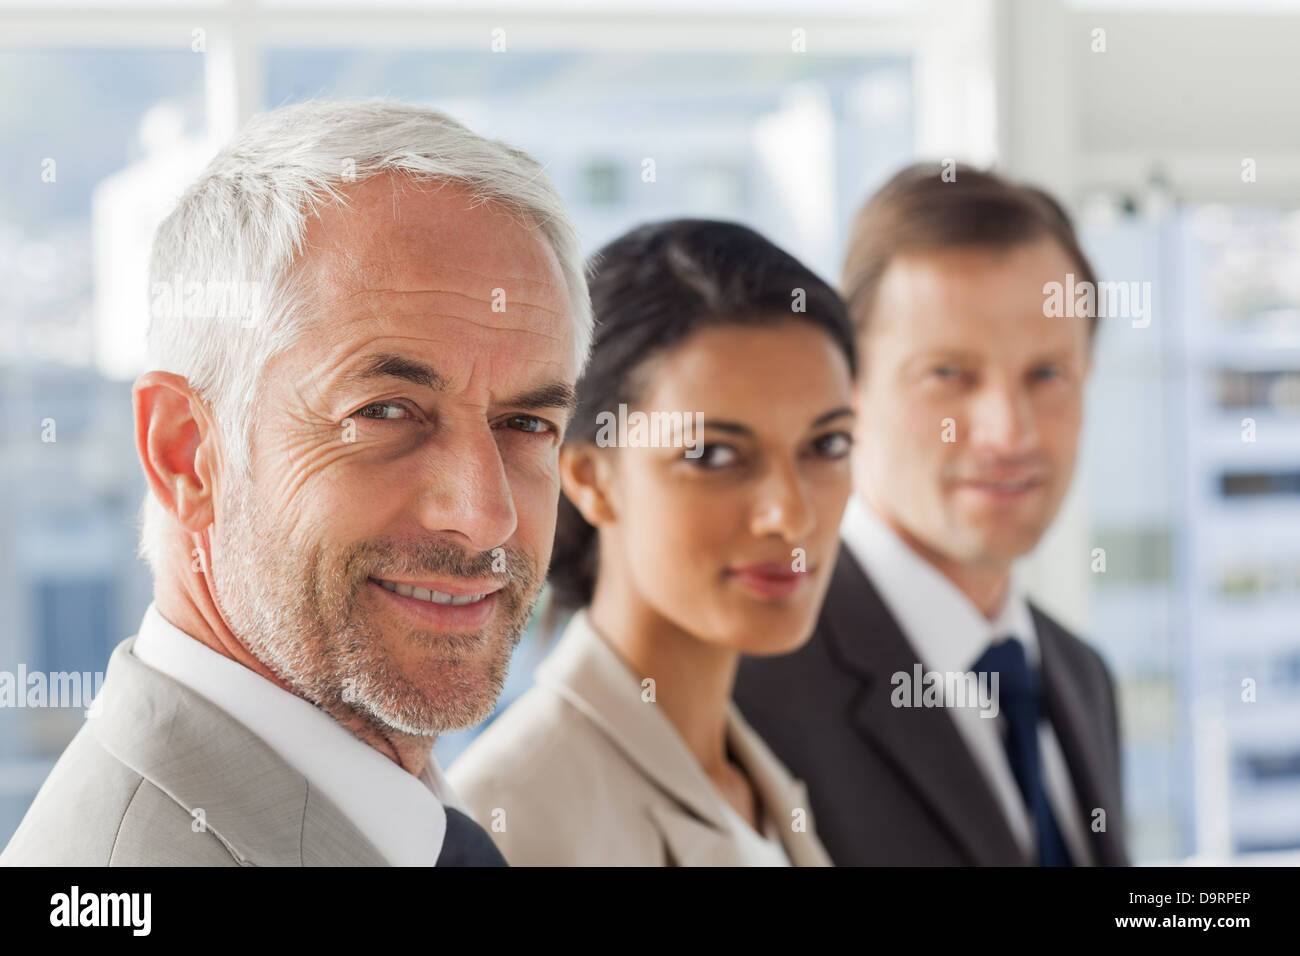 Smiling business people looking in the same way Stock Photo